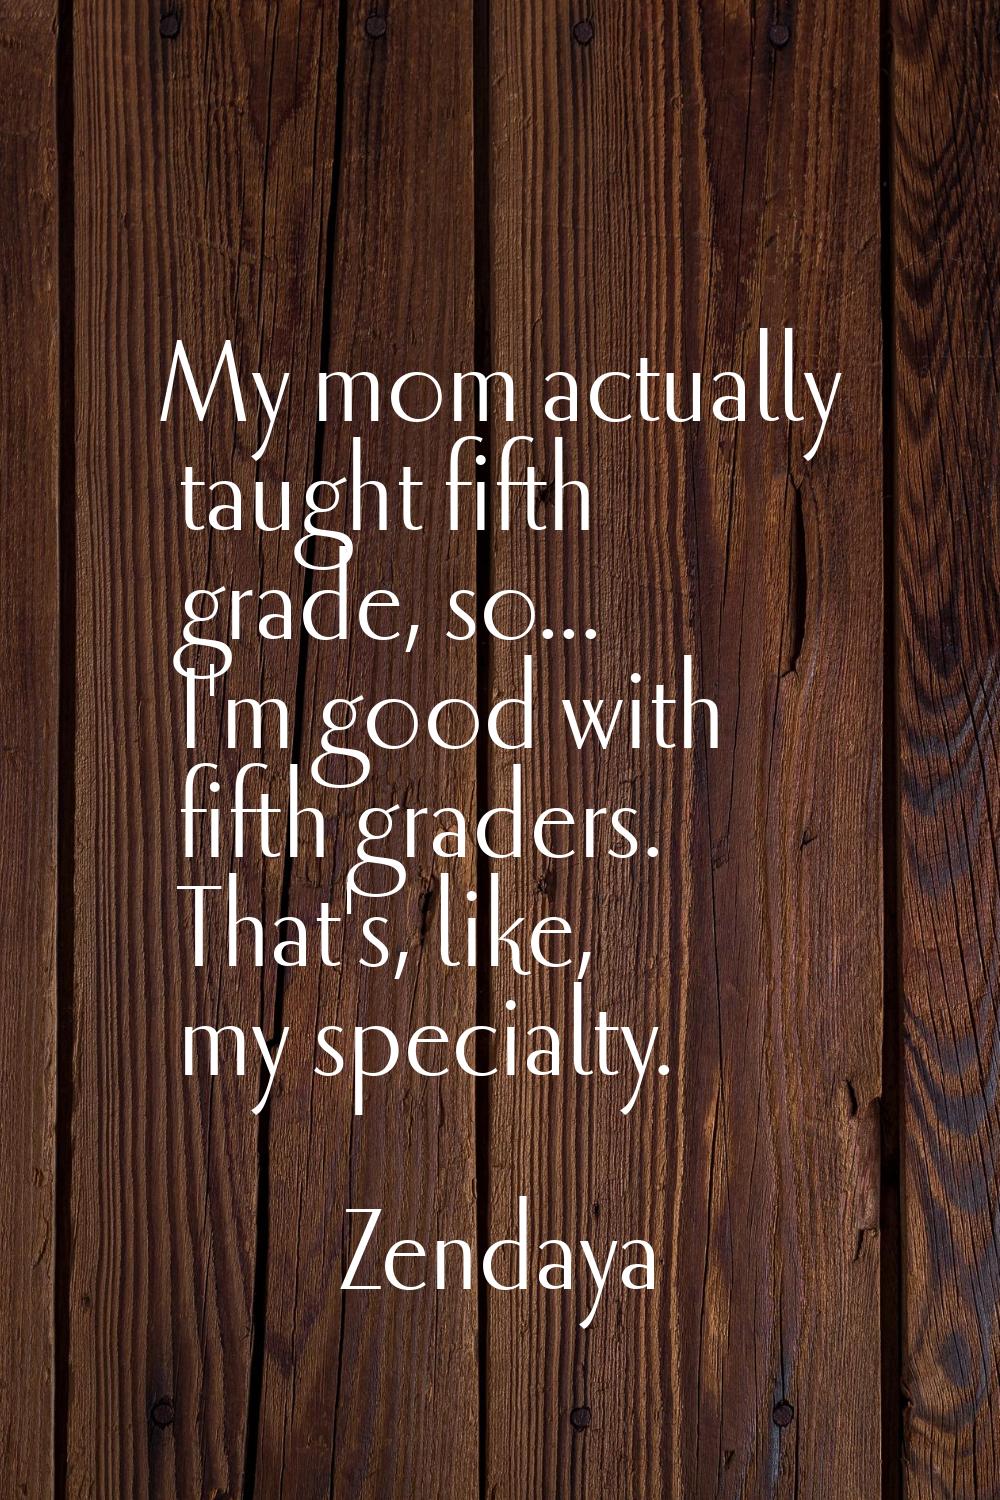 My mom actually taught fifth grade, so... I'm good with fifth graders. That's, like, my specialty.